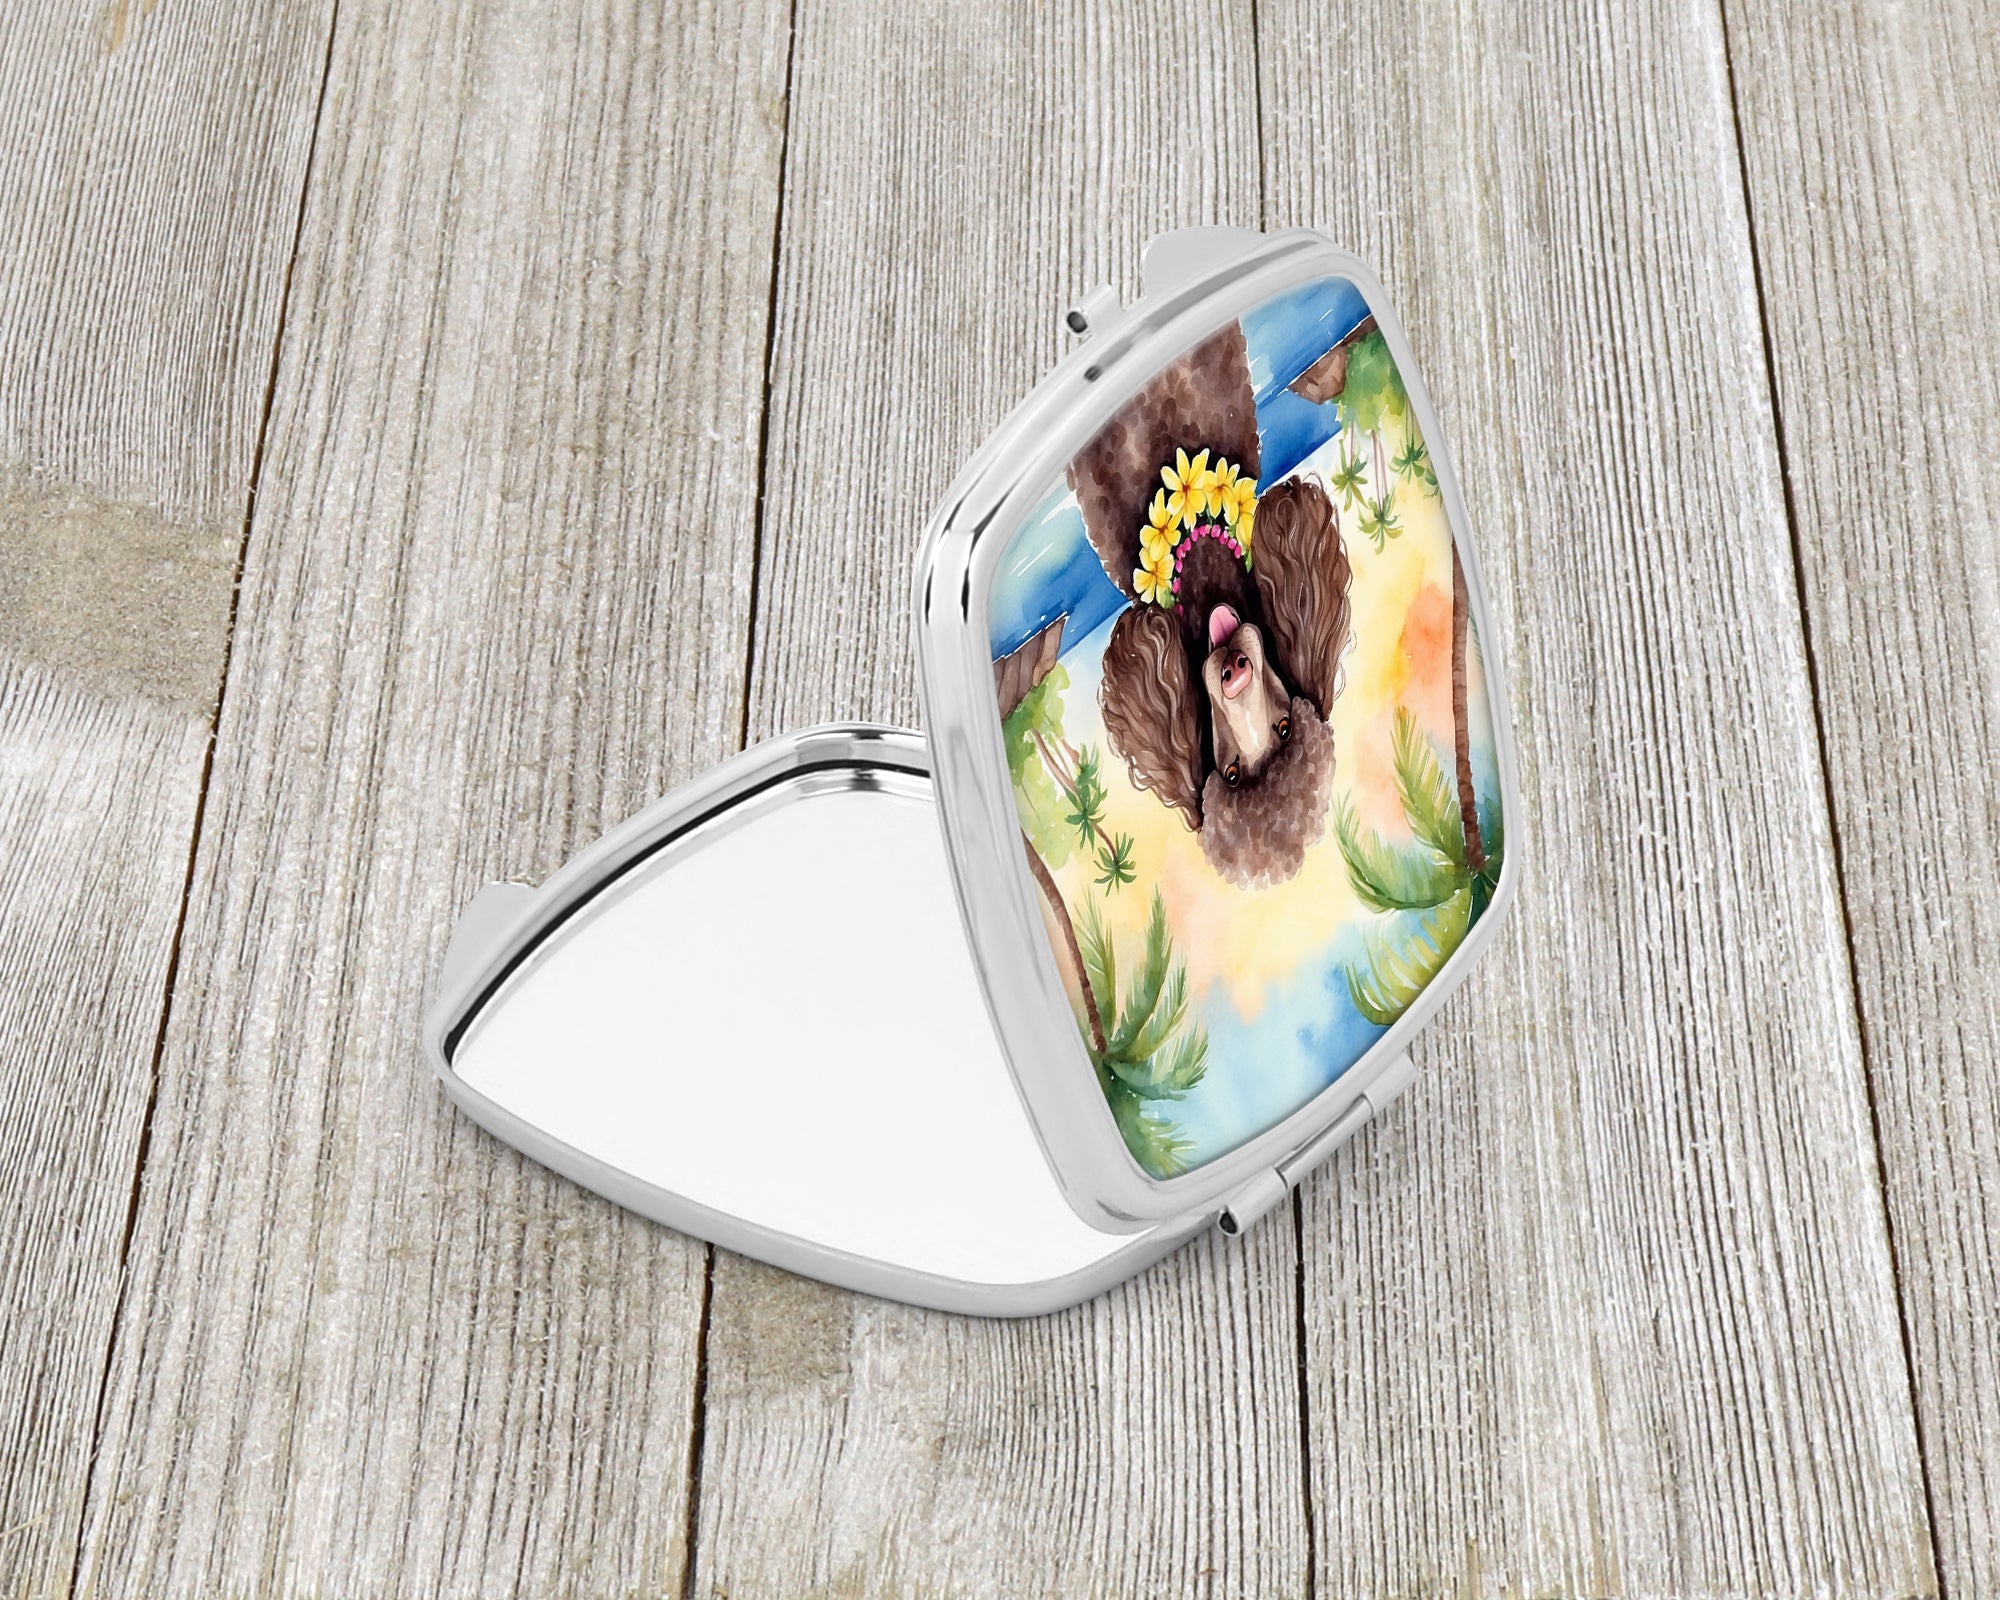 Buy this Chocolate Poodle Luau Compact Mirror